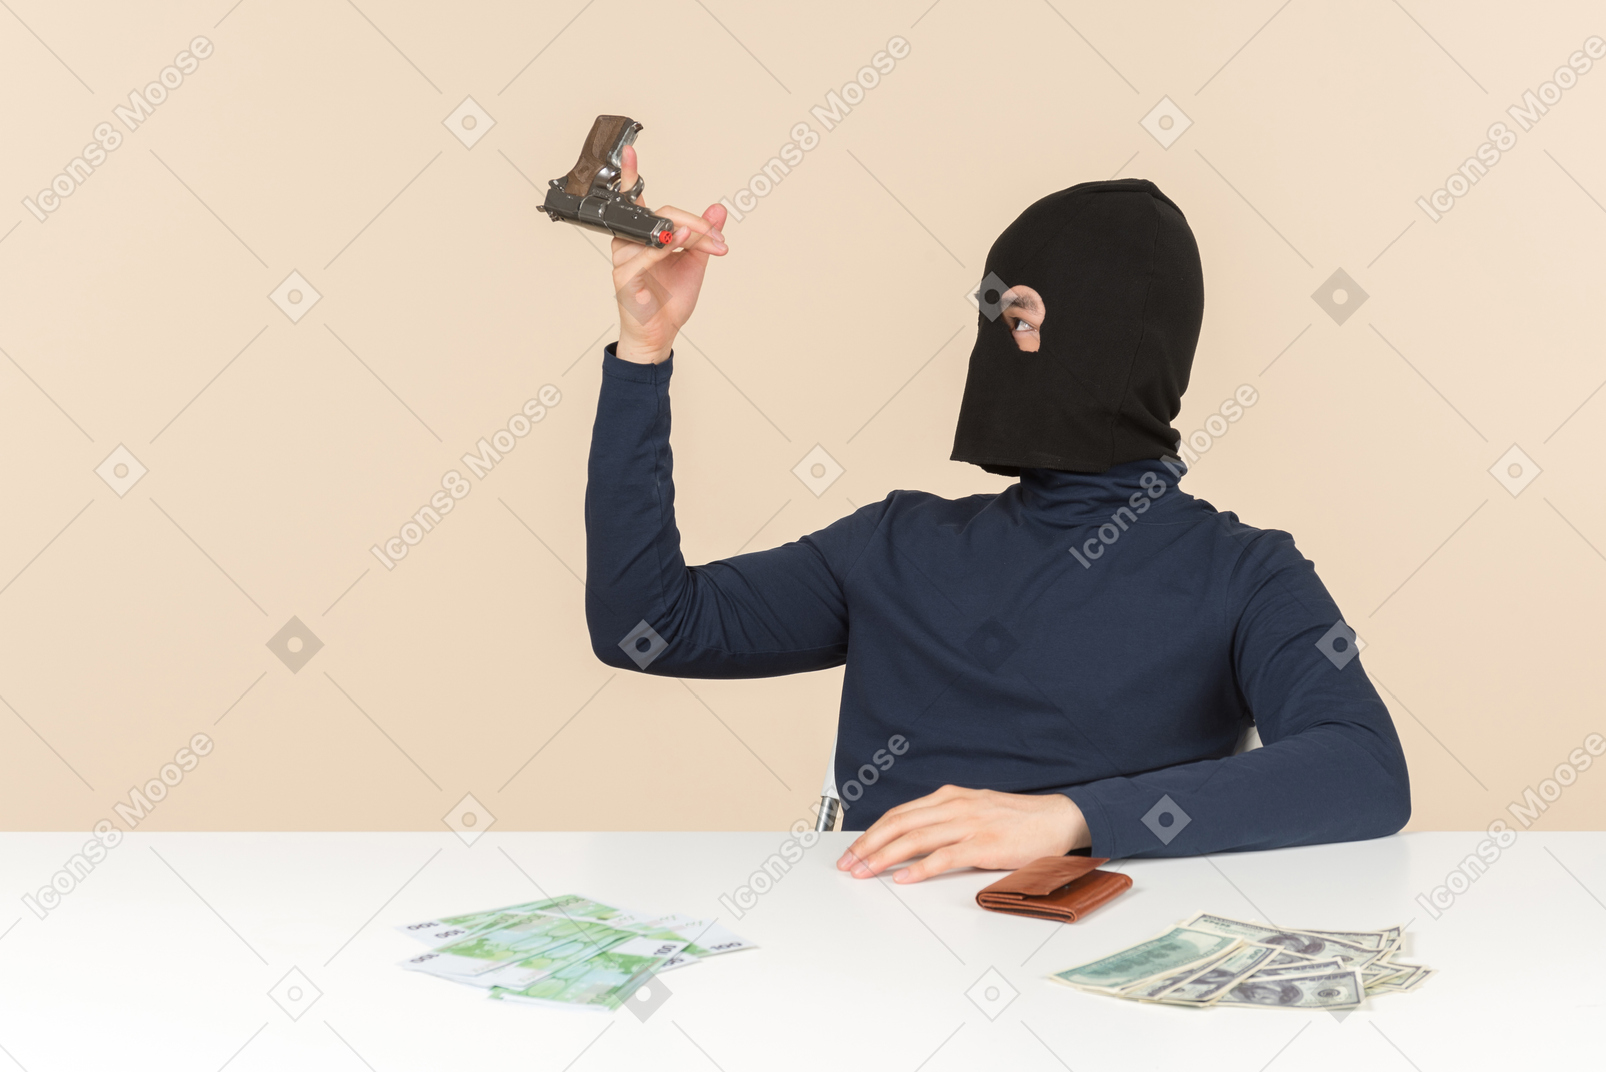 Hacker in balaclava sitting at the table with money bills on it and playing with a gun